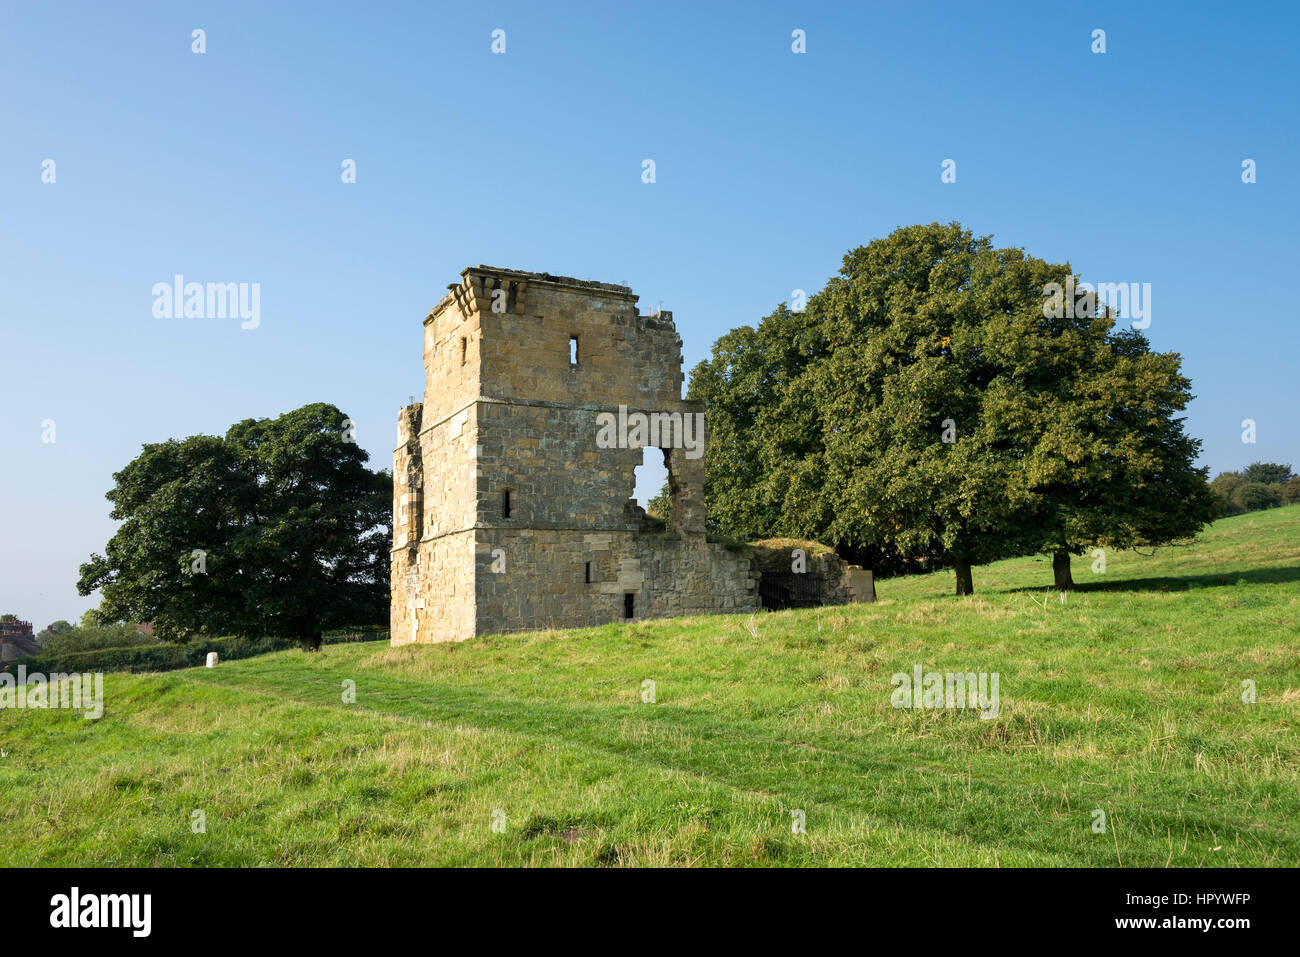 Ayton castle, a medieval fortified manor house in West Ayton, North Yorkshire, England. Stock Photo